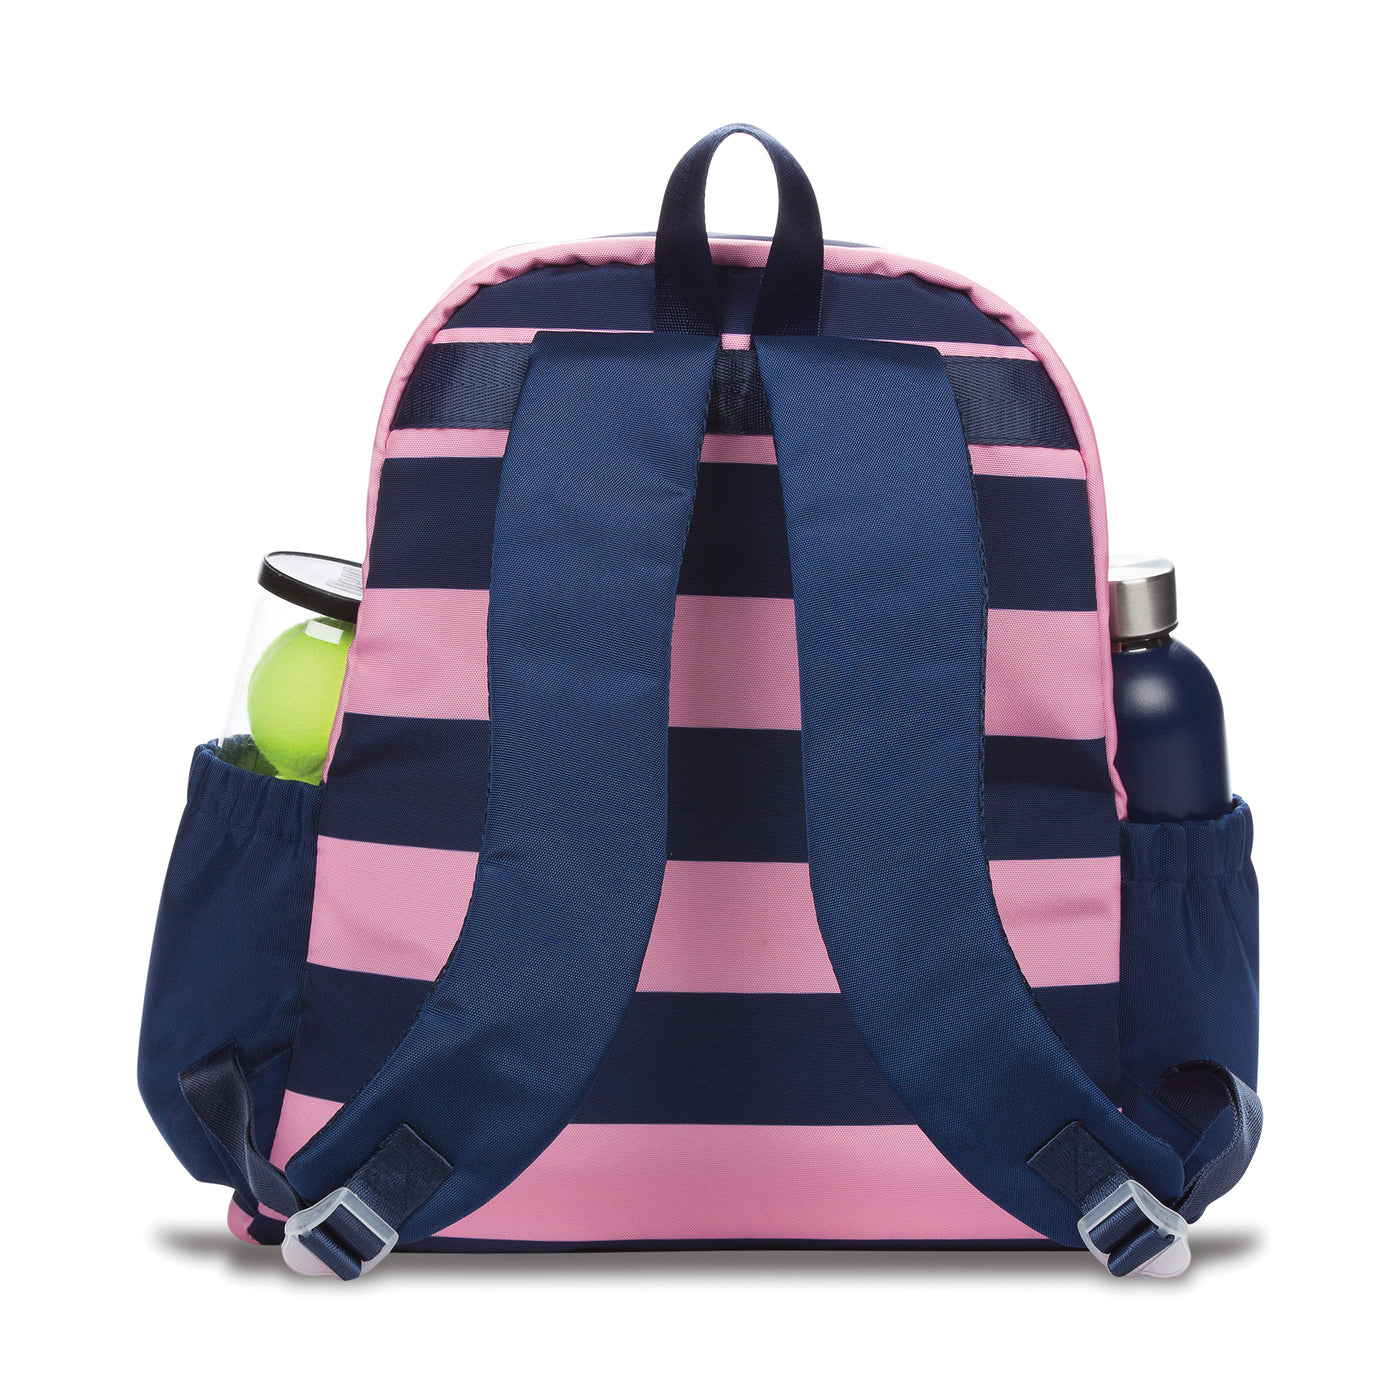 Back view of navy and pink striped tennis backpack. Backpack has navy straps and a water bottle and tennis balls in the side pockets.